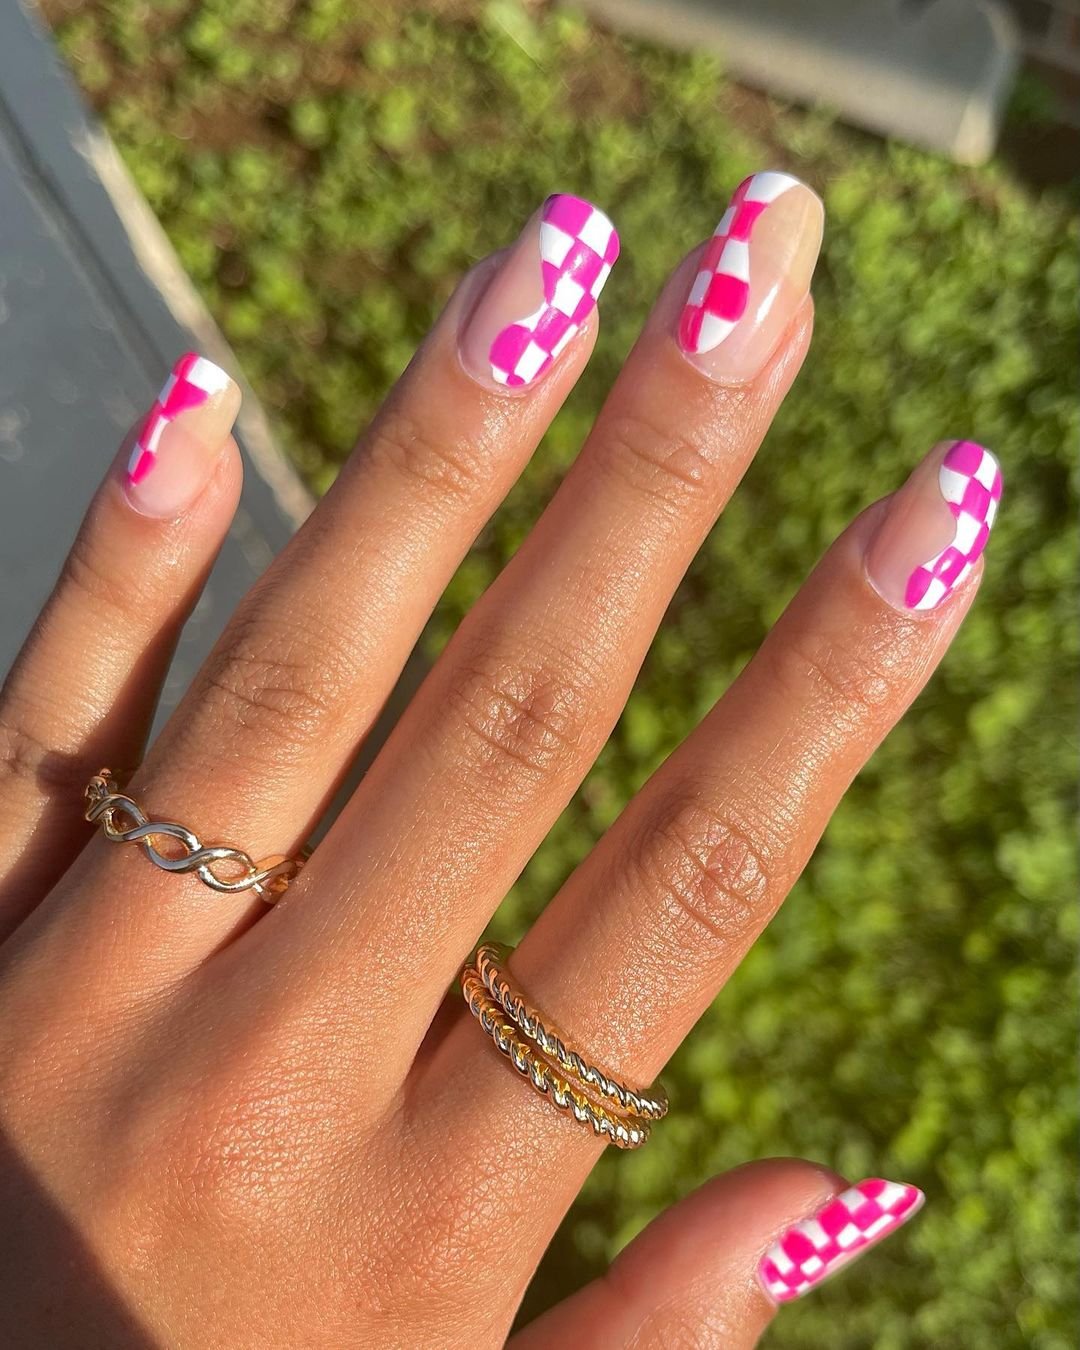 27 - Picture of Checkered Nails